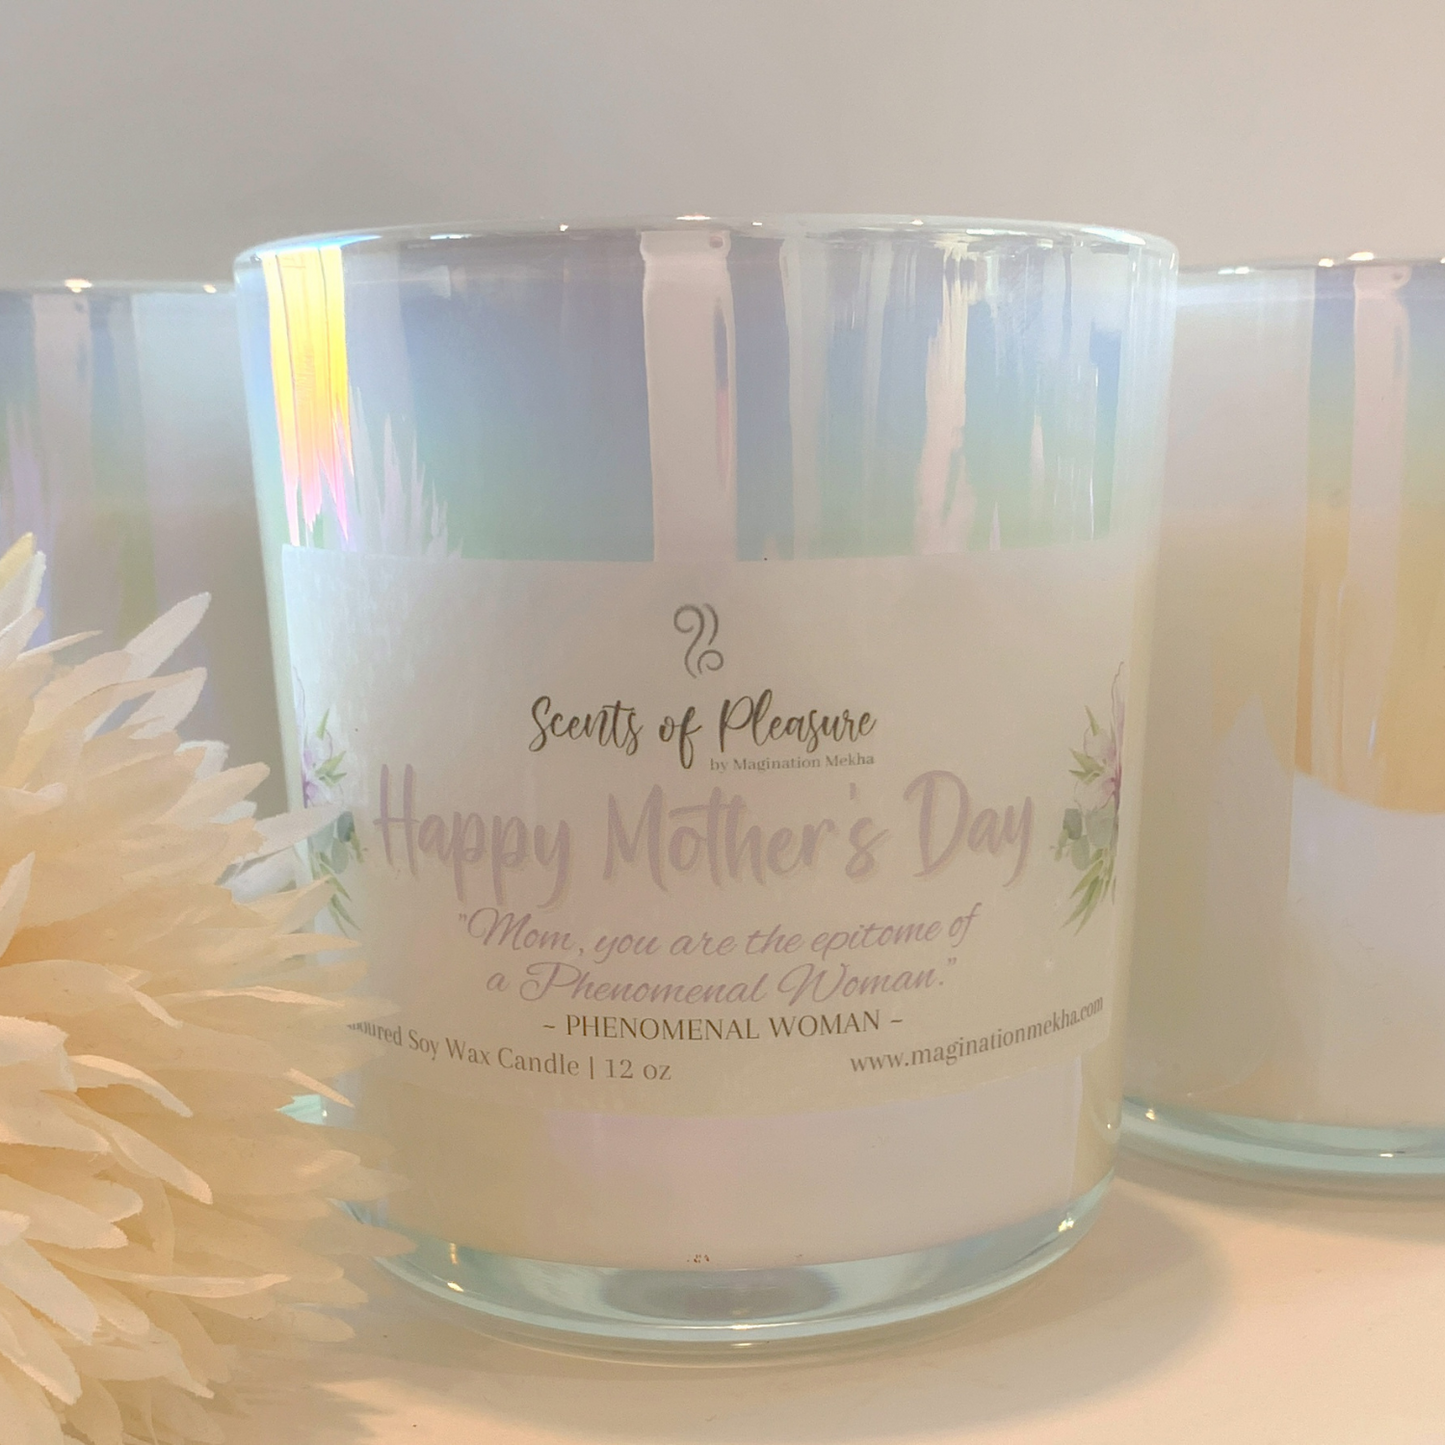 Mother's Day - "PHENOMENAL WOMAN" Candle